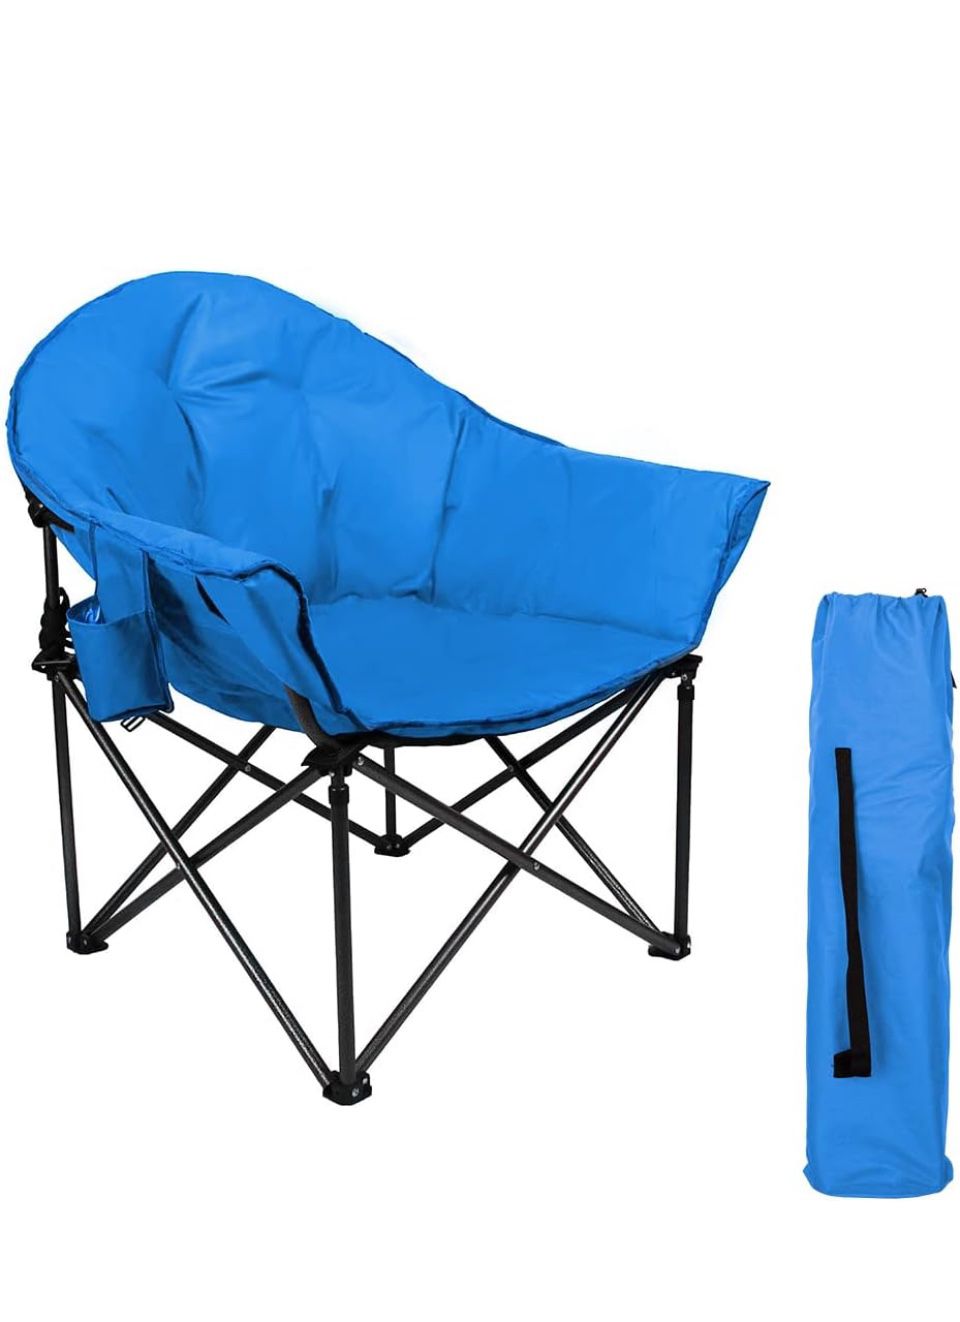 Padded Oversized Folding Camping Chair, Portable Moon Saucer Chair, Round Outdoor Chair with for Adults, Hiking, Camping, Fishing, Palace Blue